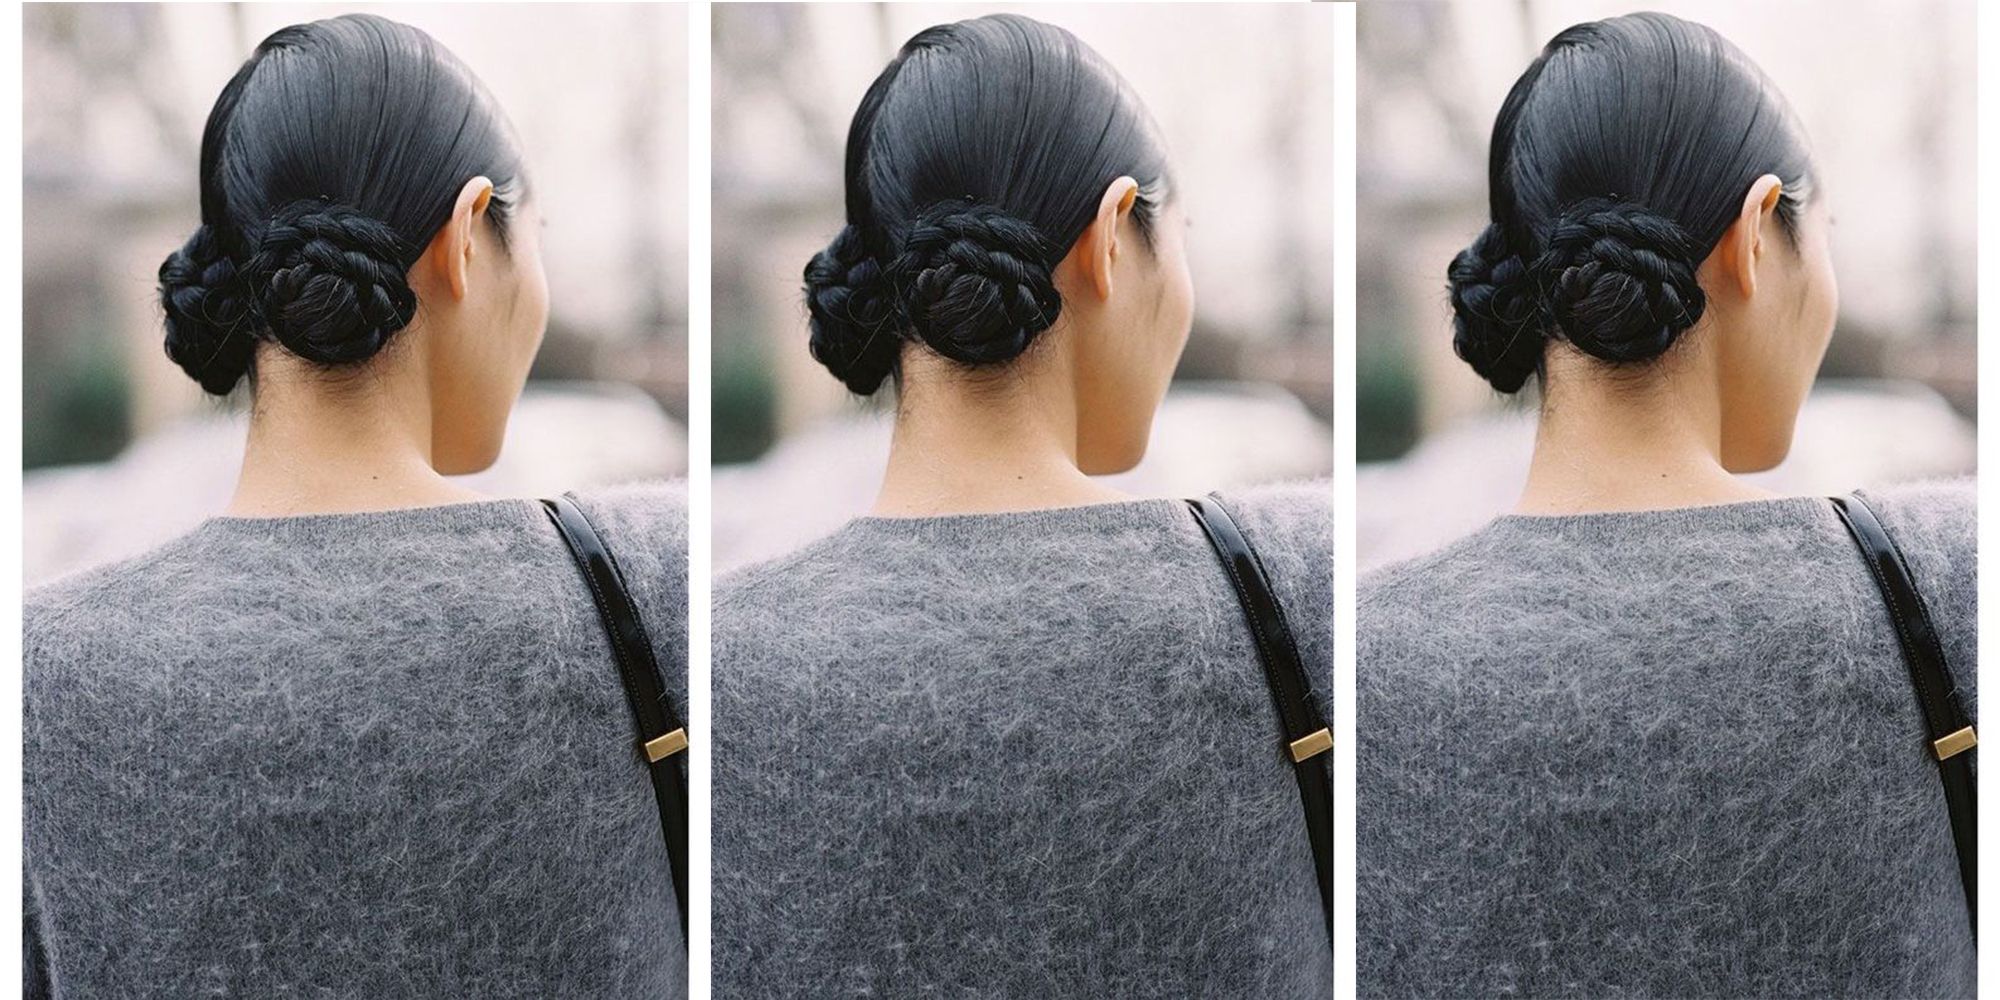 Macaron Buns - Why Macaron Buns Are The French Girl Hair Style We're Feeling